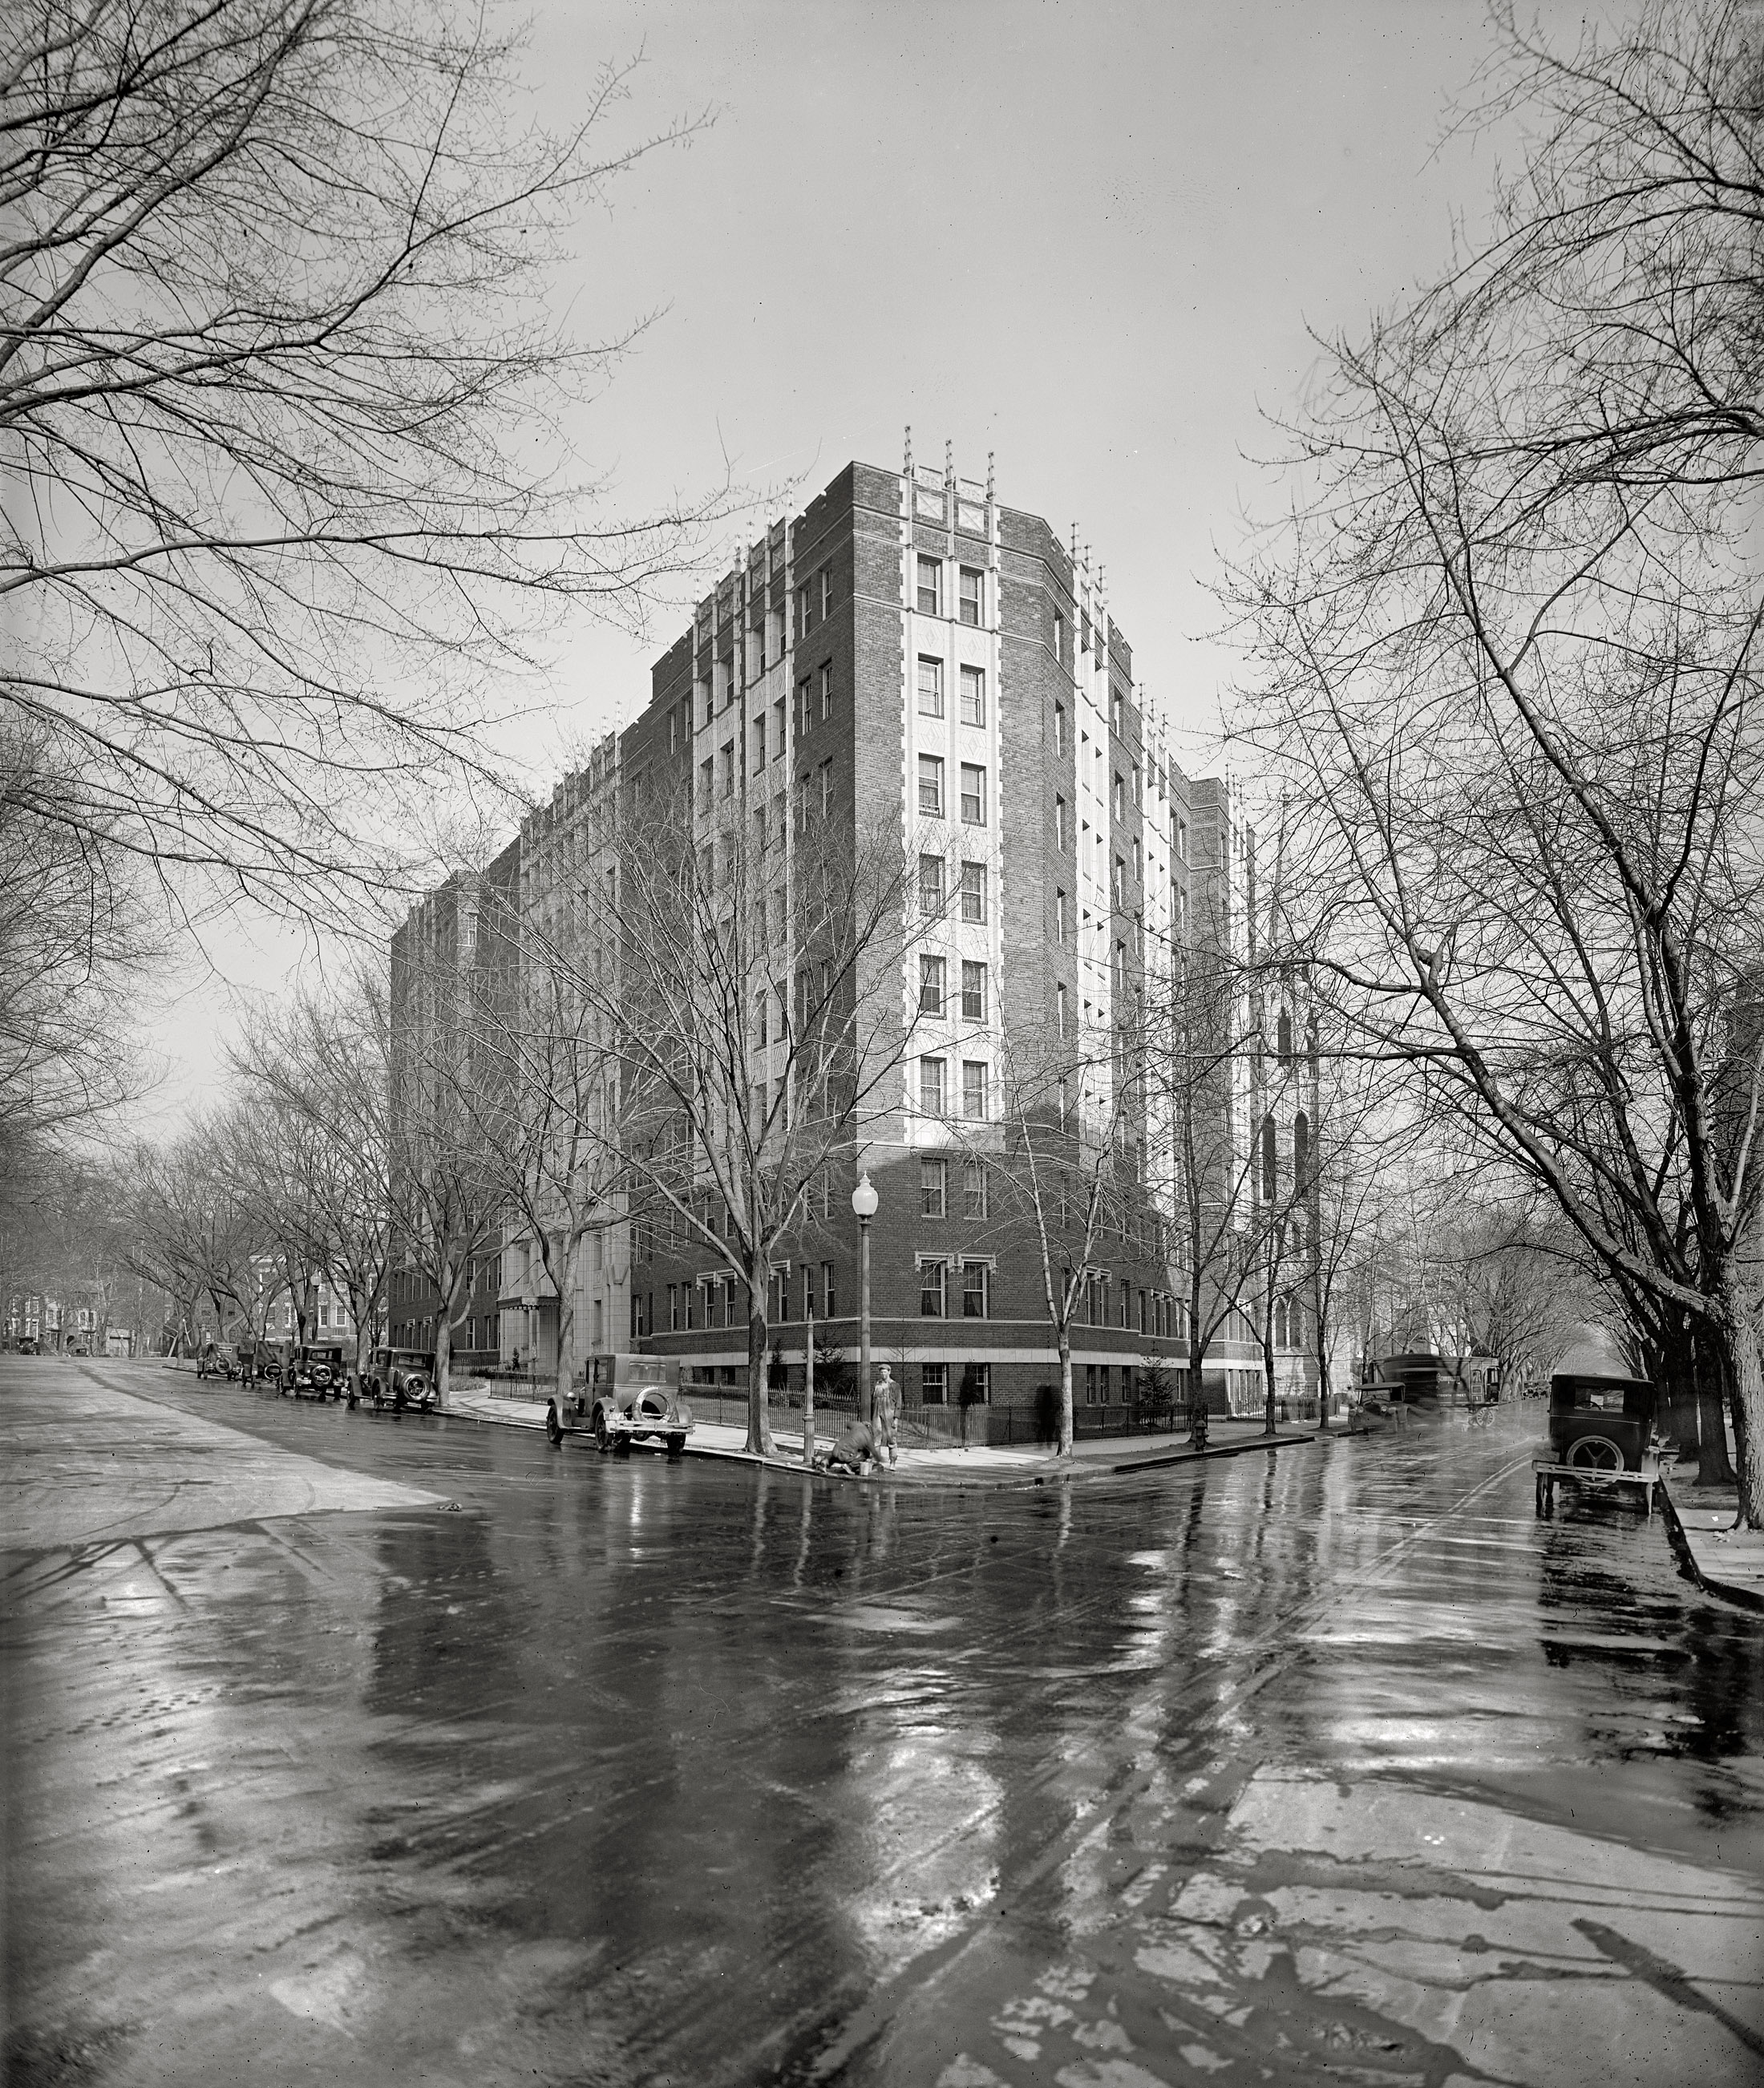 1926. "W.H. West Co., Wakefield." Wakefield Hall was  "an imposing new apartment edifice" put up by W.H. West Co. at 15th and V streets N.W. in Washington. Rents: $60 to $160 a month. National Photo Co. View full size.